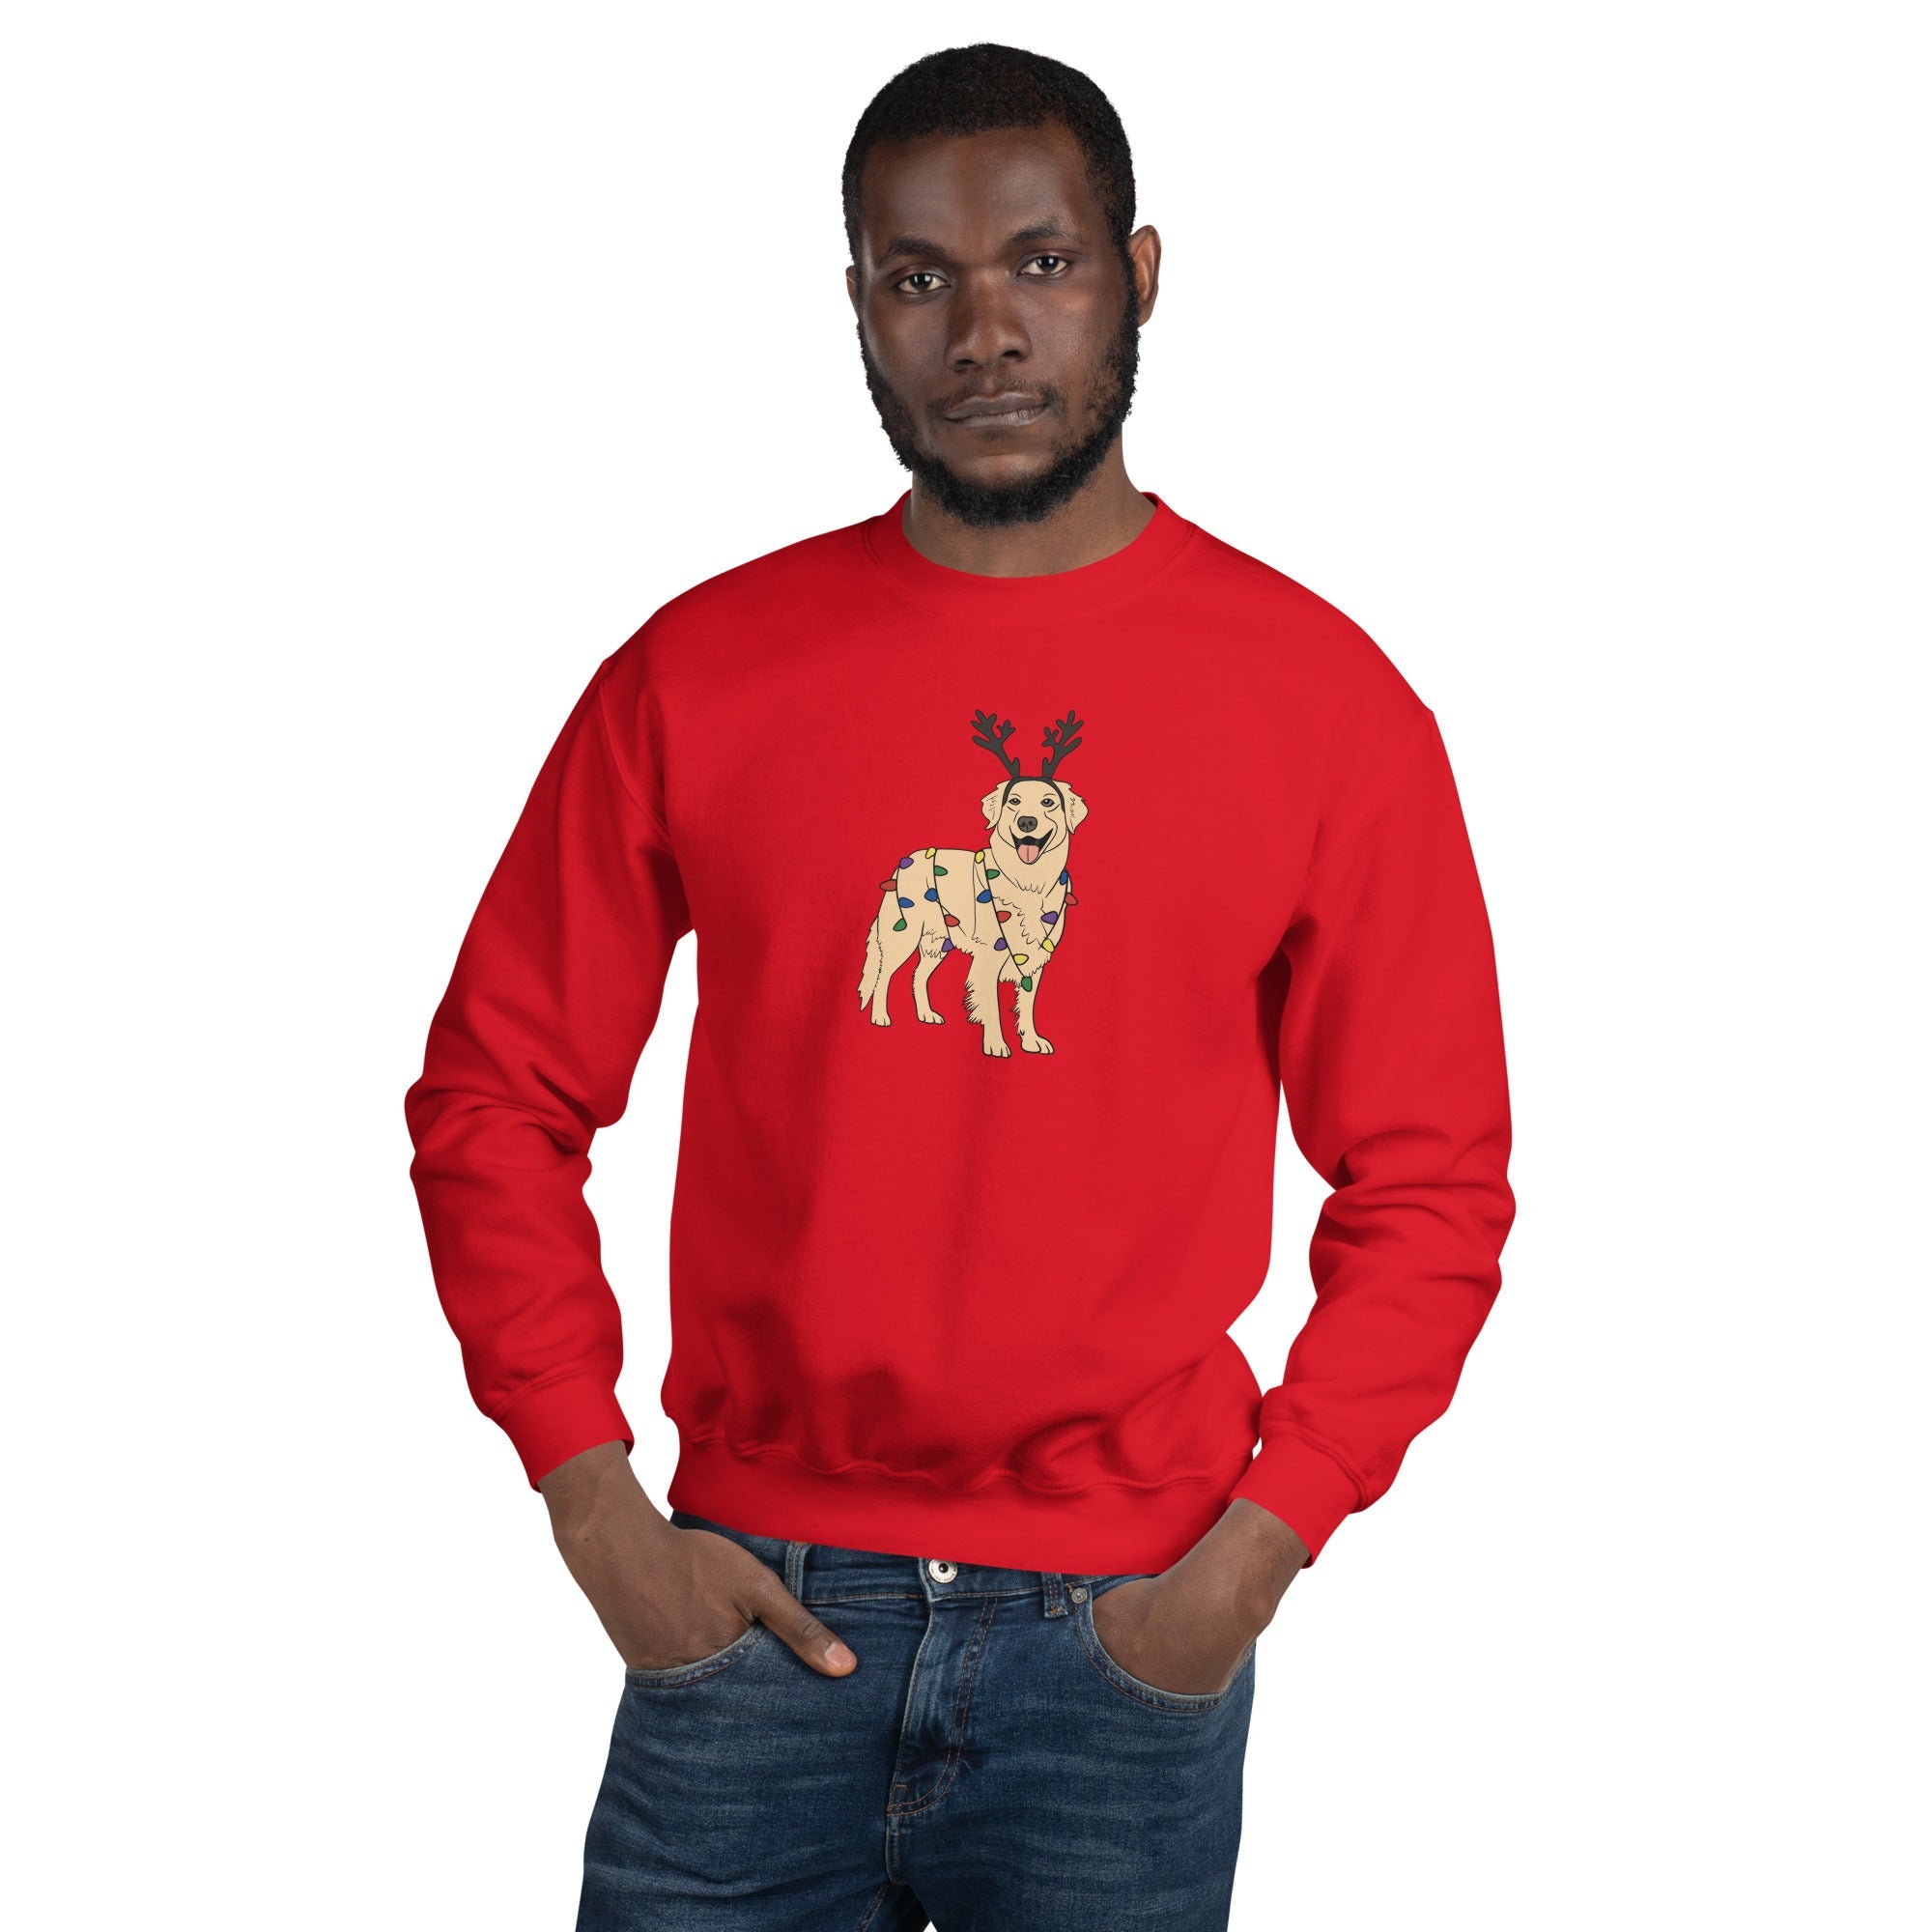 Getting in the Holiday Spirit Crewneck Sweatshirt - TAILWAGS UNLIMITED